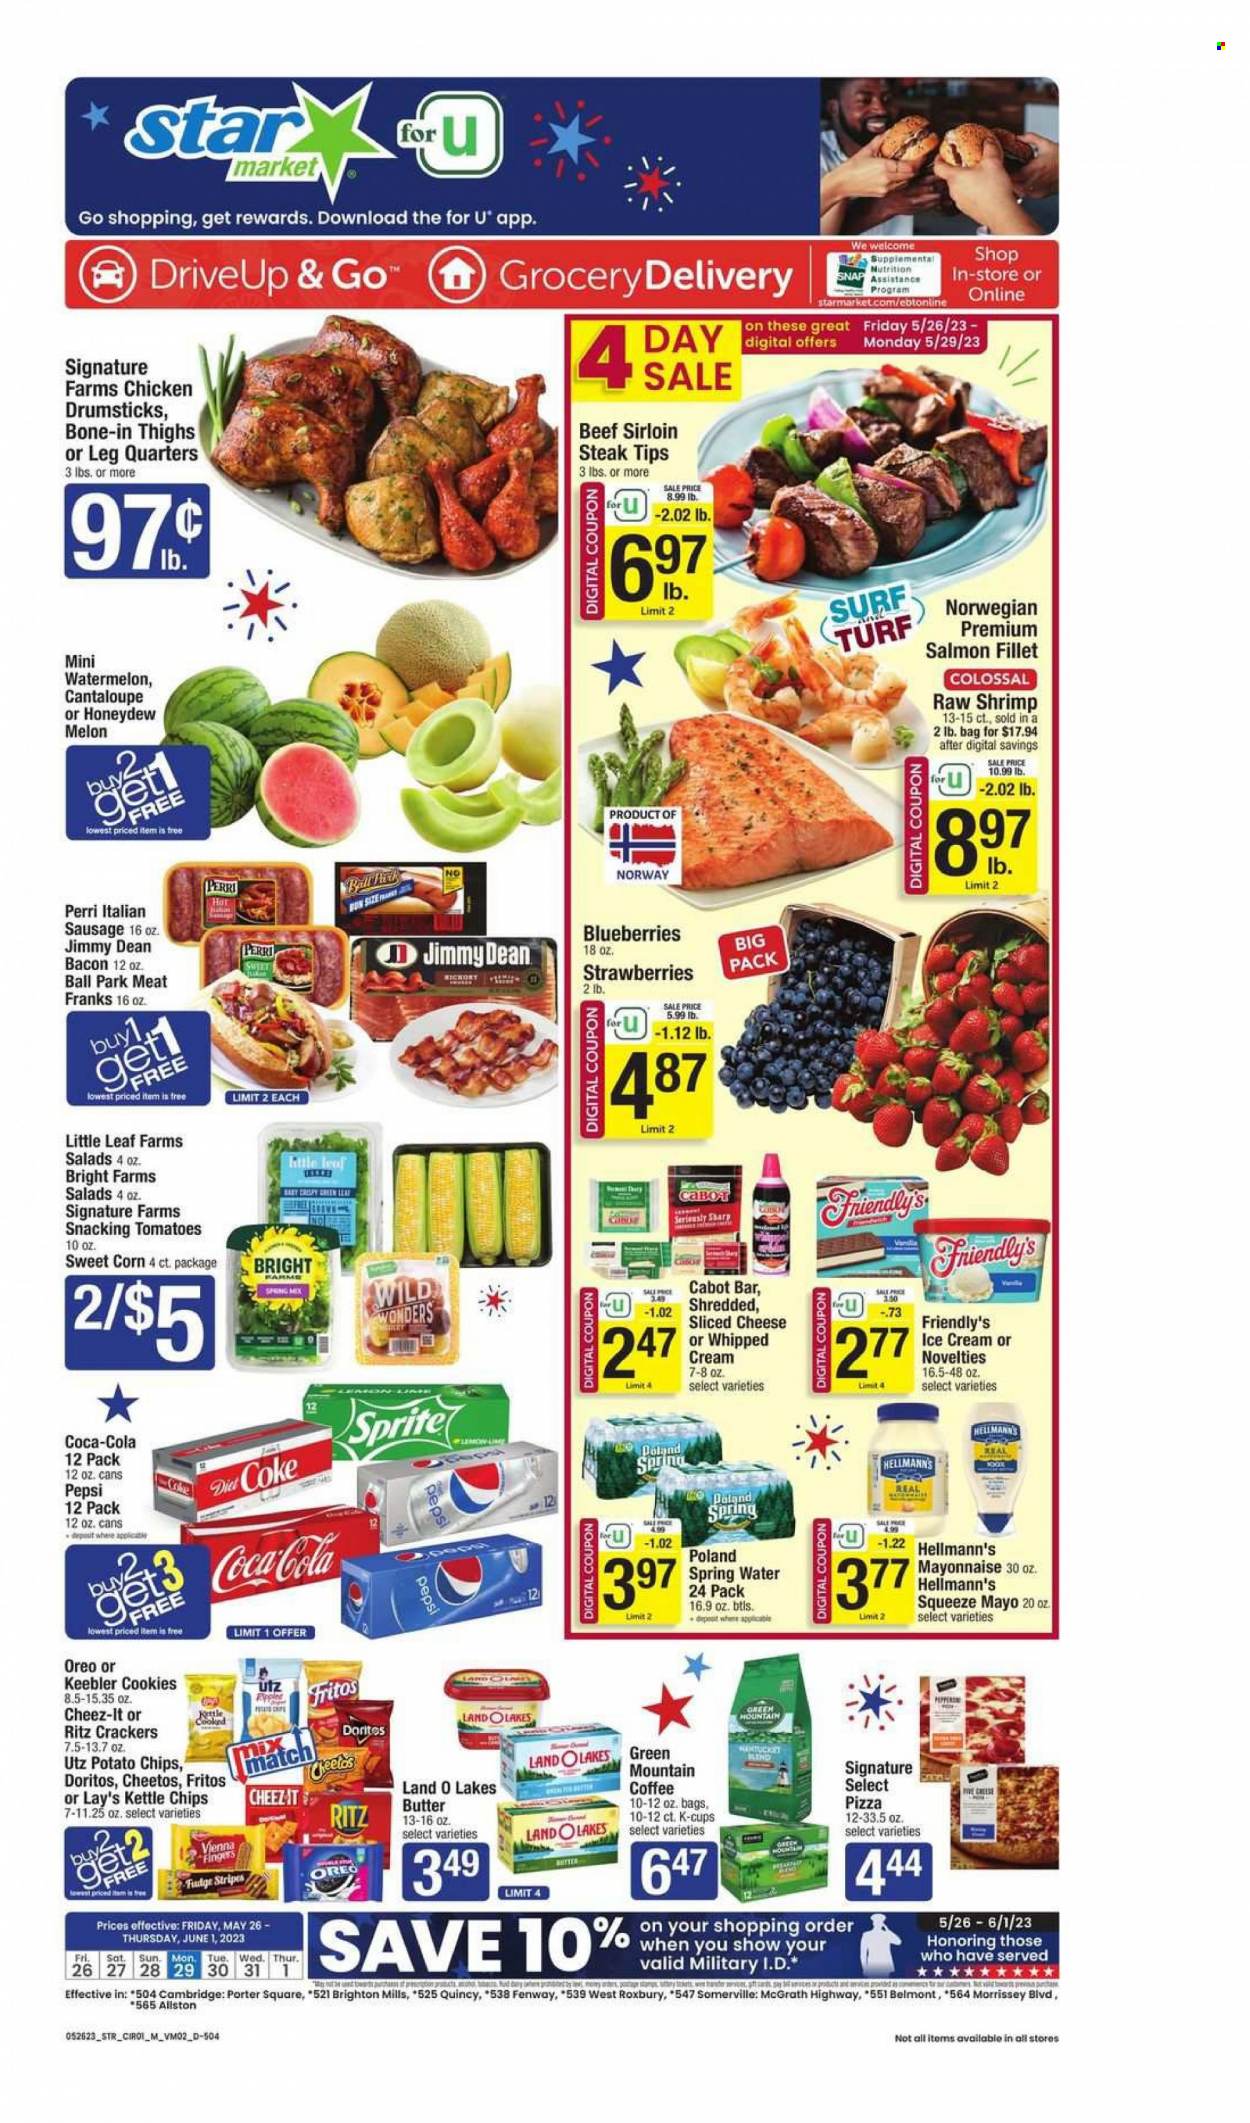 thumbnail - Star Market Flyer - 05/26/2023 - 06/01/2023 - Sales products - cantaloupe, corn, sweet corn, blueberries, strawberries, watermelon, honeydew, salmon, salmon fillet, shrimps, pizza, Jimmy Dean, italian sausage, frankfurters, sliced cheese, whipped cream, mayonnaise, Hellmann’s, ice cream, Friendly's Ice Cream, cookies, fudge, vienna fingers, crackers, Keebler, RITZ, Doritos, Fritos, potato chips, Cheetos, chips, Lay’s, Cheez-It, Kettle chips, salty snack, Coca-Cola, Sprite, Pepsi, Diet Coke, soft drink, Coke, spring water, water, coffee, coffee capsules, K-Cups, Green Mountain, chicken drumsticks, chicken, beef meat, beef sirloin, steak, sirloin steak, melons. Page 1.